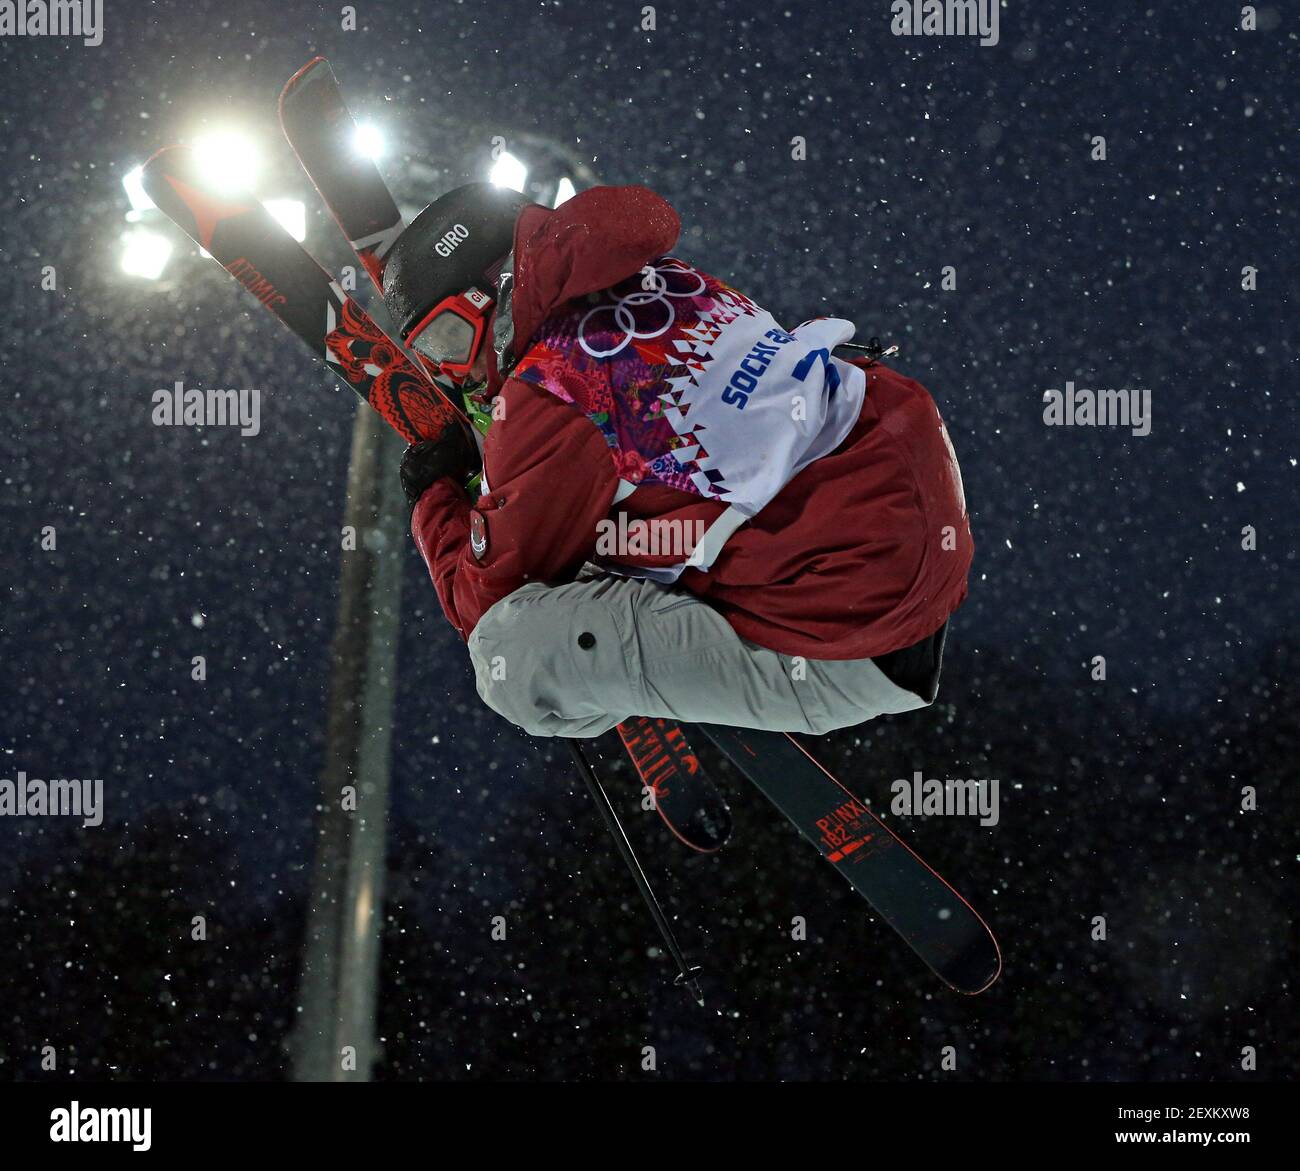 Mike Riddle of Canada competes in qualifying for the men's ski halfpipe at Rosa Khutor Extreme Park during the Winter Olympics in Sochi, Russia, Tuesday, Feb. 18, 2014. (Photo by Brian Cassella/Chicago Tribune/MCT/Sipa USA) Stock Photo